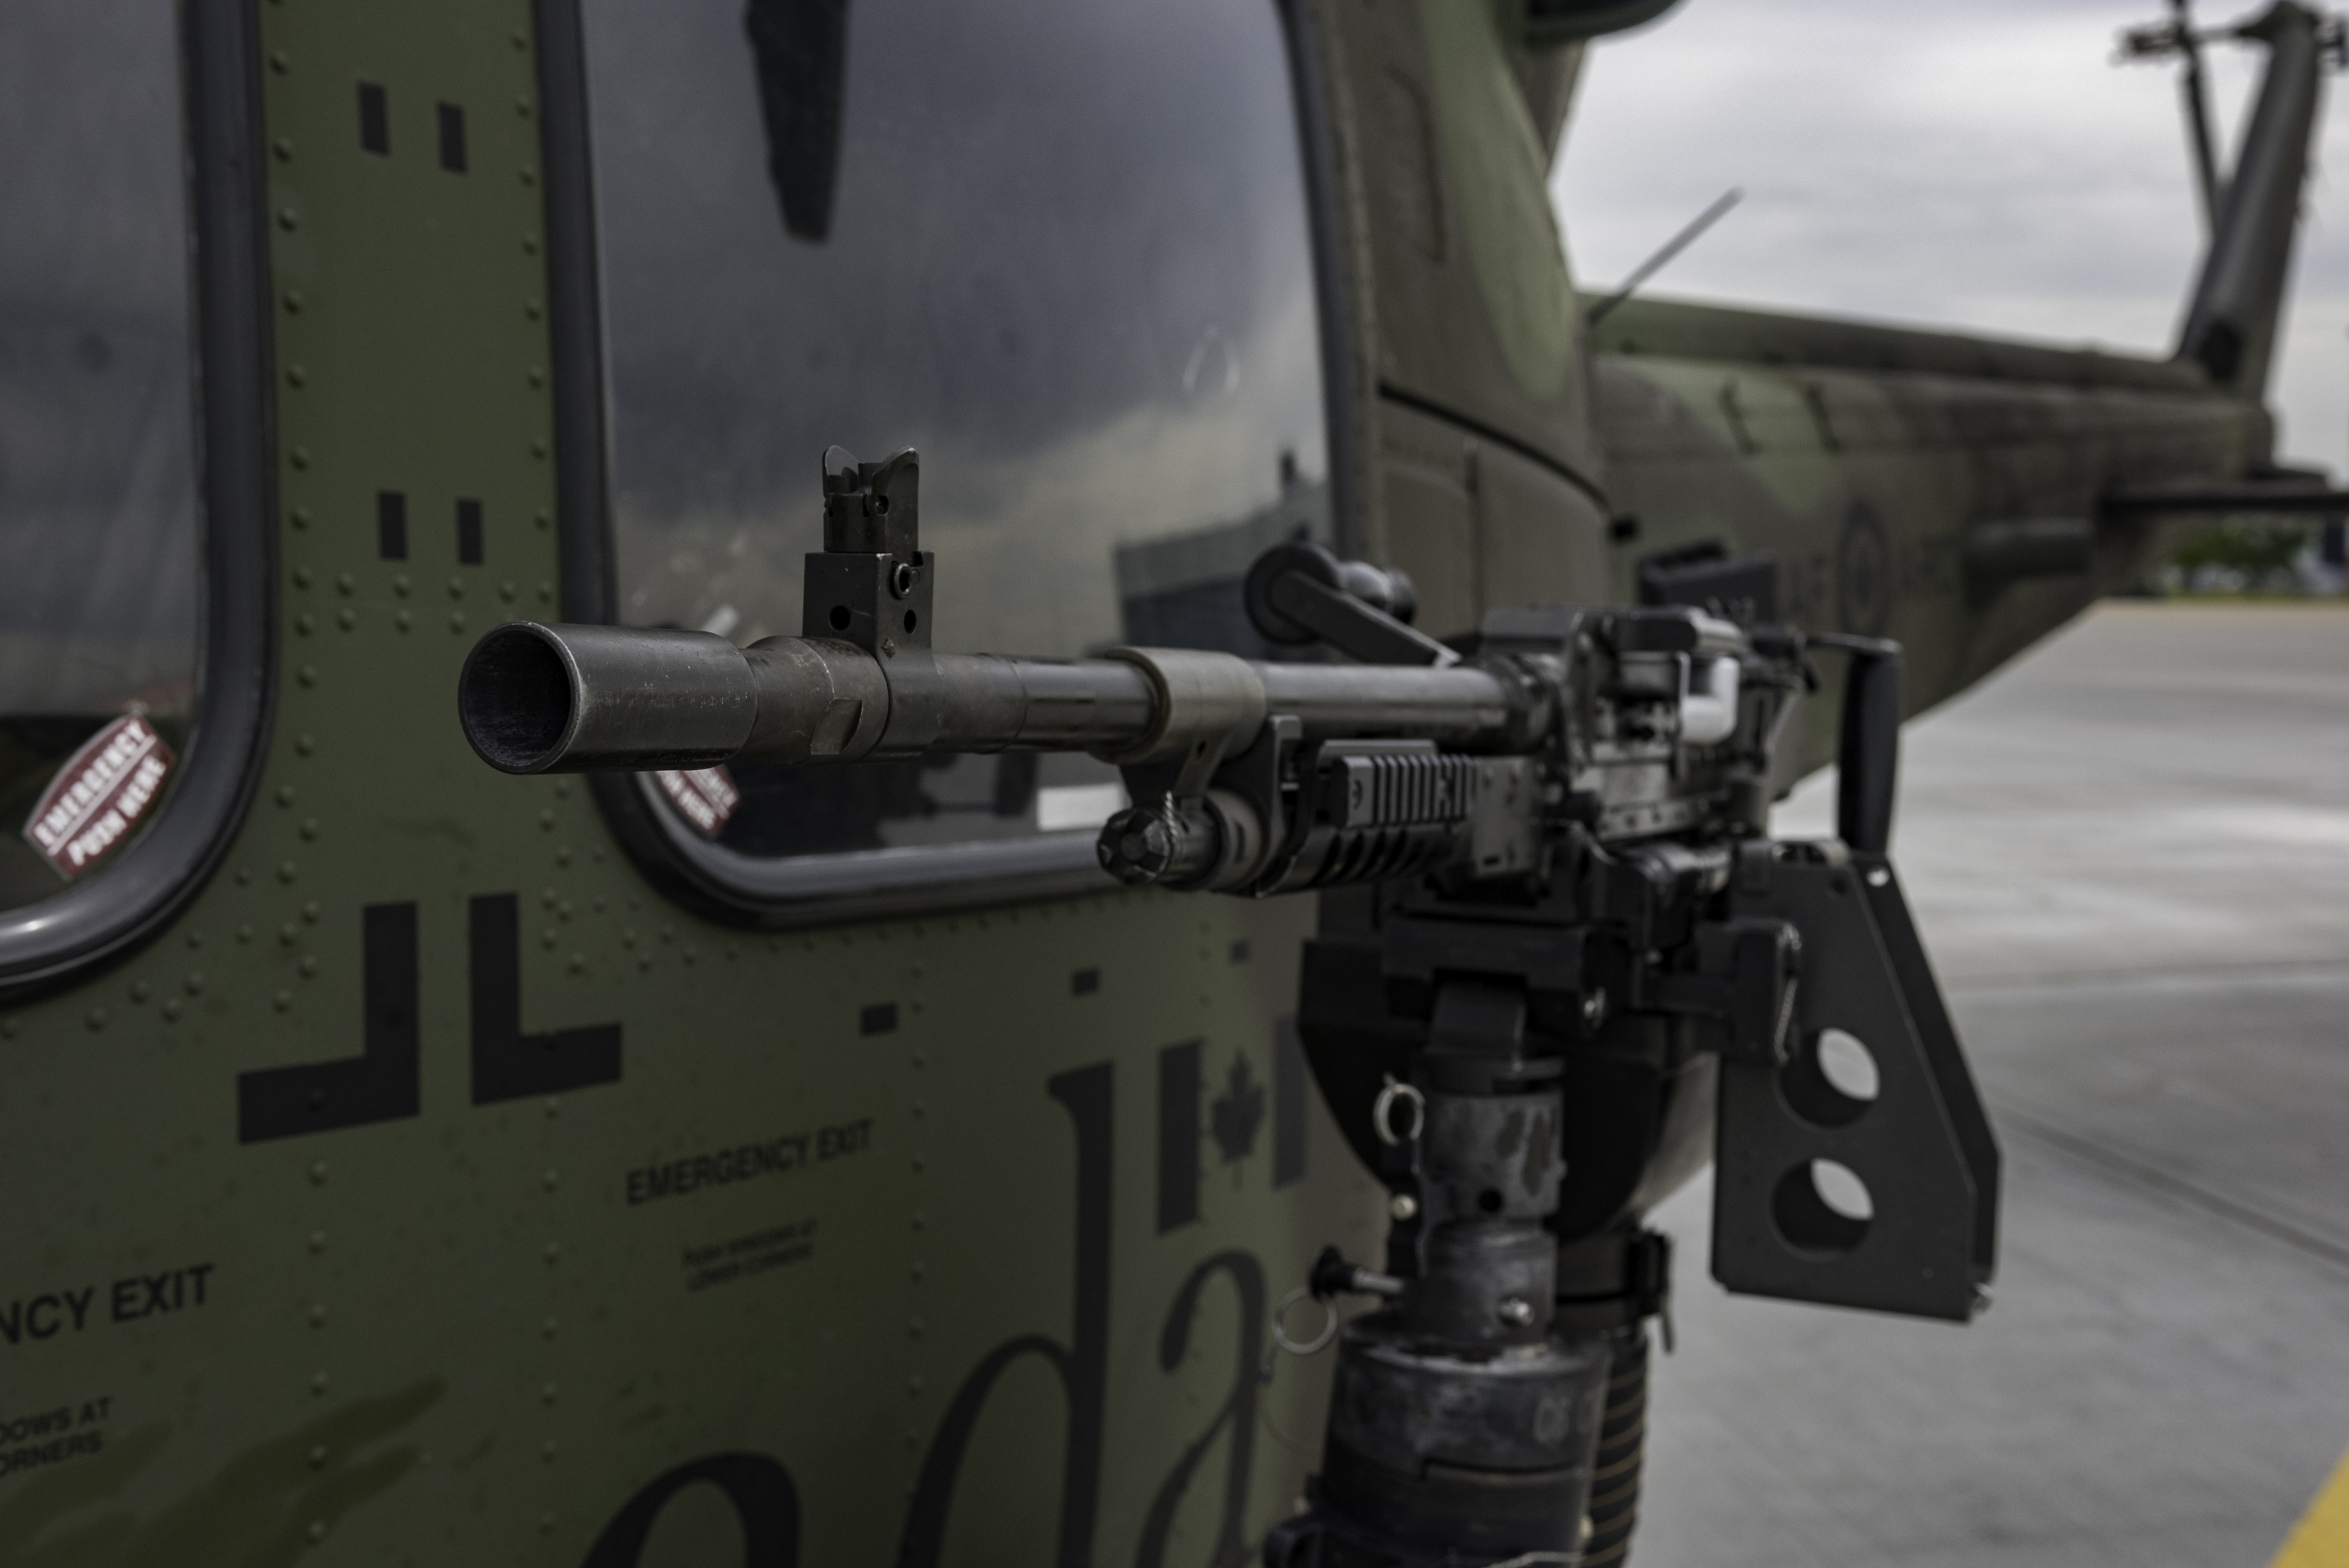 408 Tactical Helicopter Squadron CH-146 Griffon helicopters that participated in Gander Gunner in July, at 4 Wing Cold Lake, Alberta, were configured with dual, side mounted C6 machine guns. PHOTO: Private Connie Valin